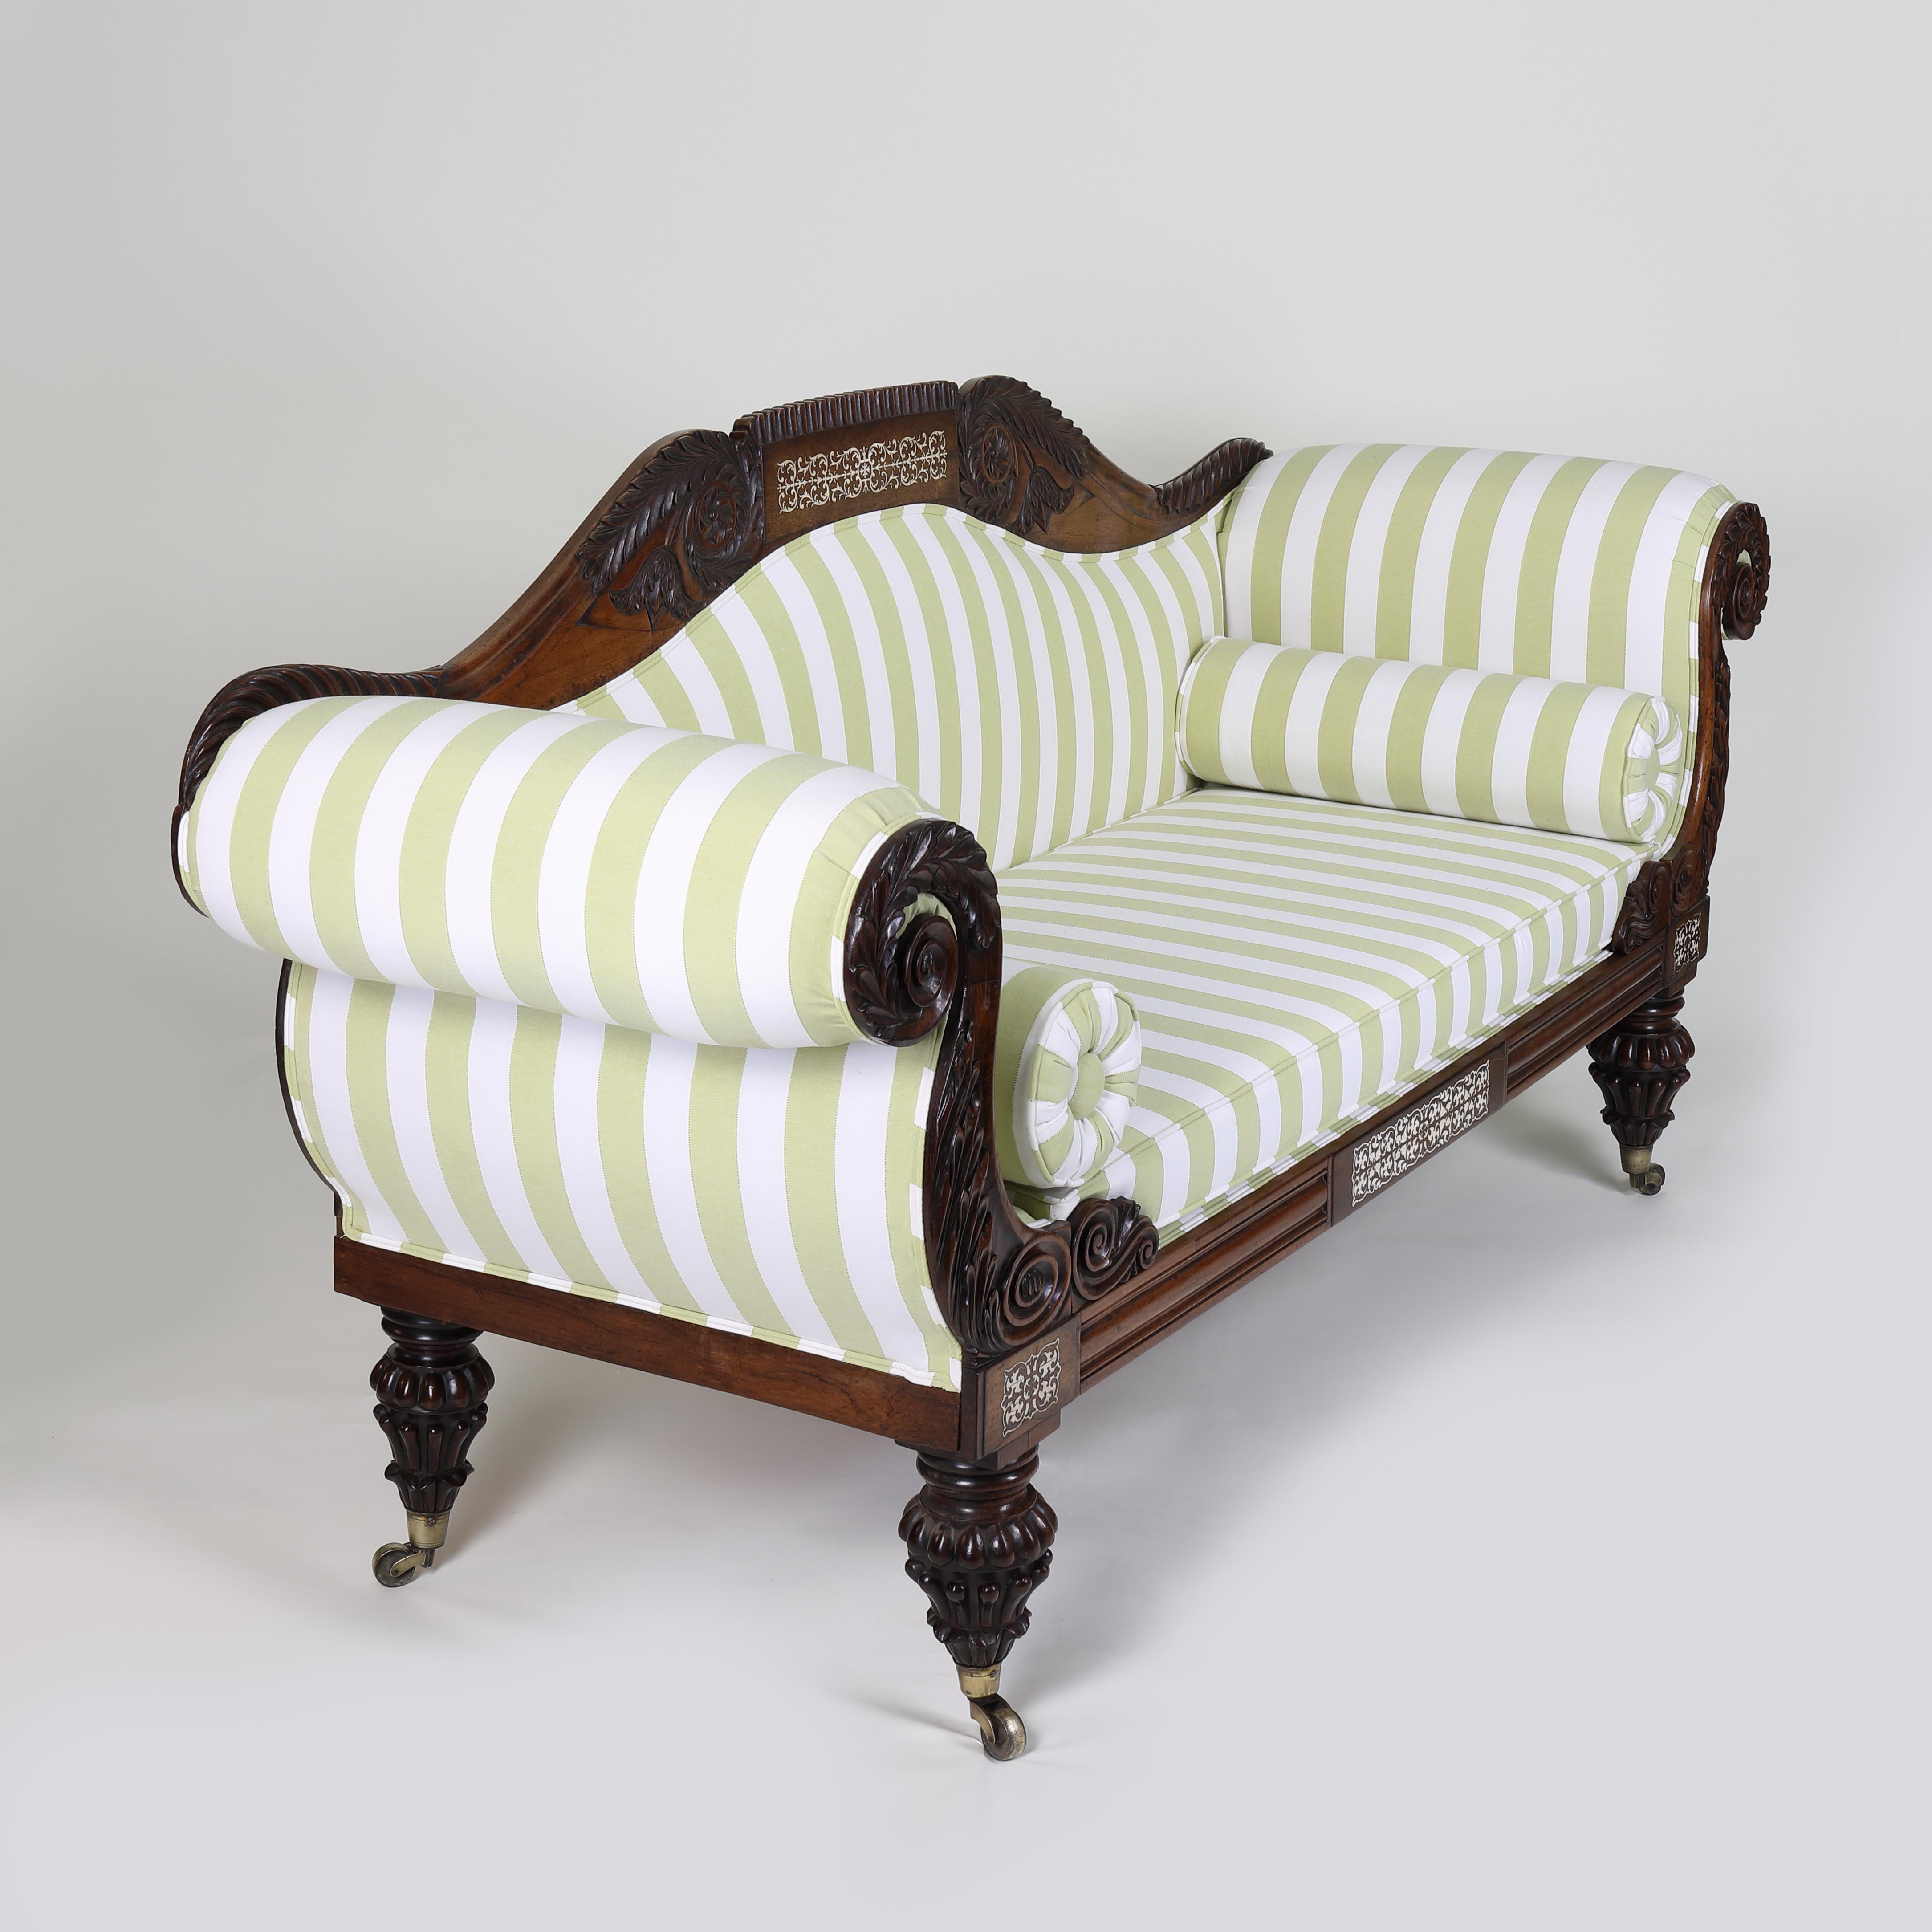 A grand Regency scroll-end settee constructed in rosewood with panels of intricately cut ivory. Adorned with acanthus leaf carving to the back and scroll ends and standing on turned and reeded legs with brass castors. 
An opulent and imposing piece